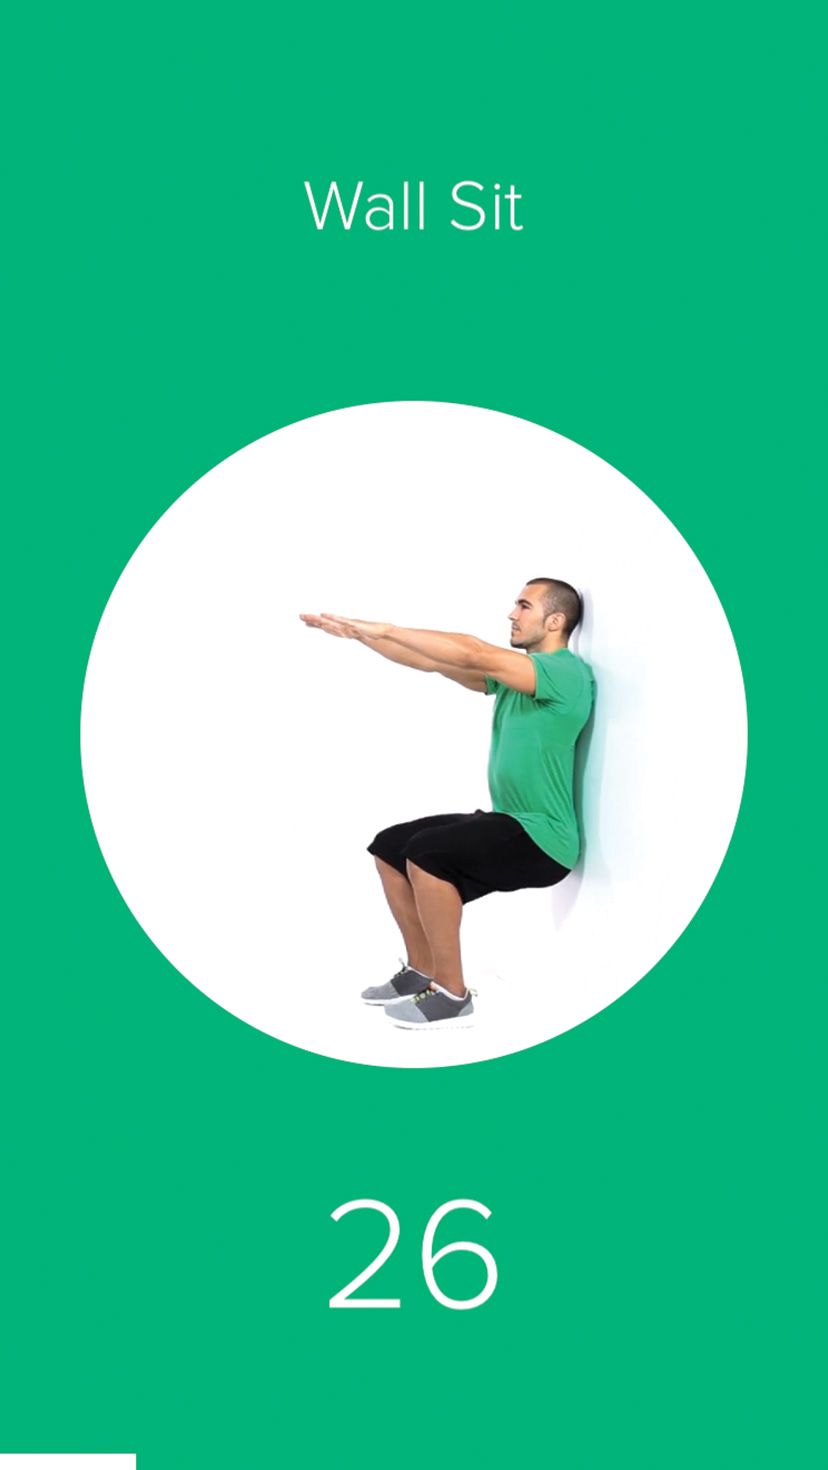 7 Minute Workout - Fitness App on the App Store